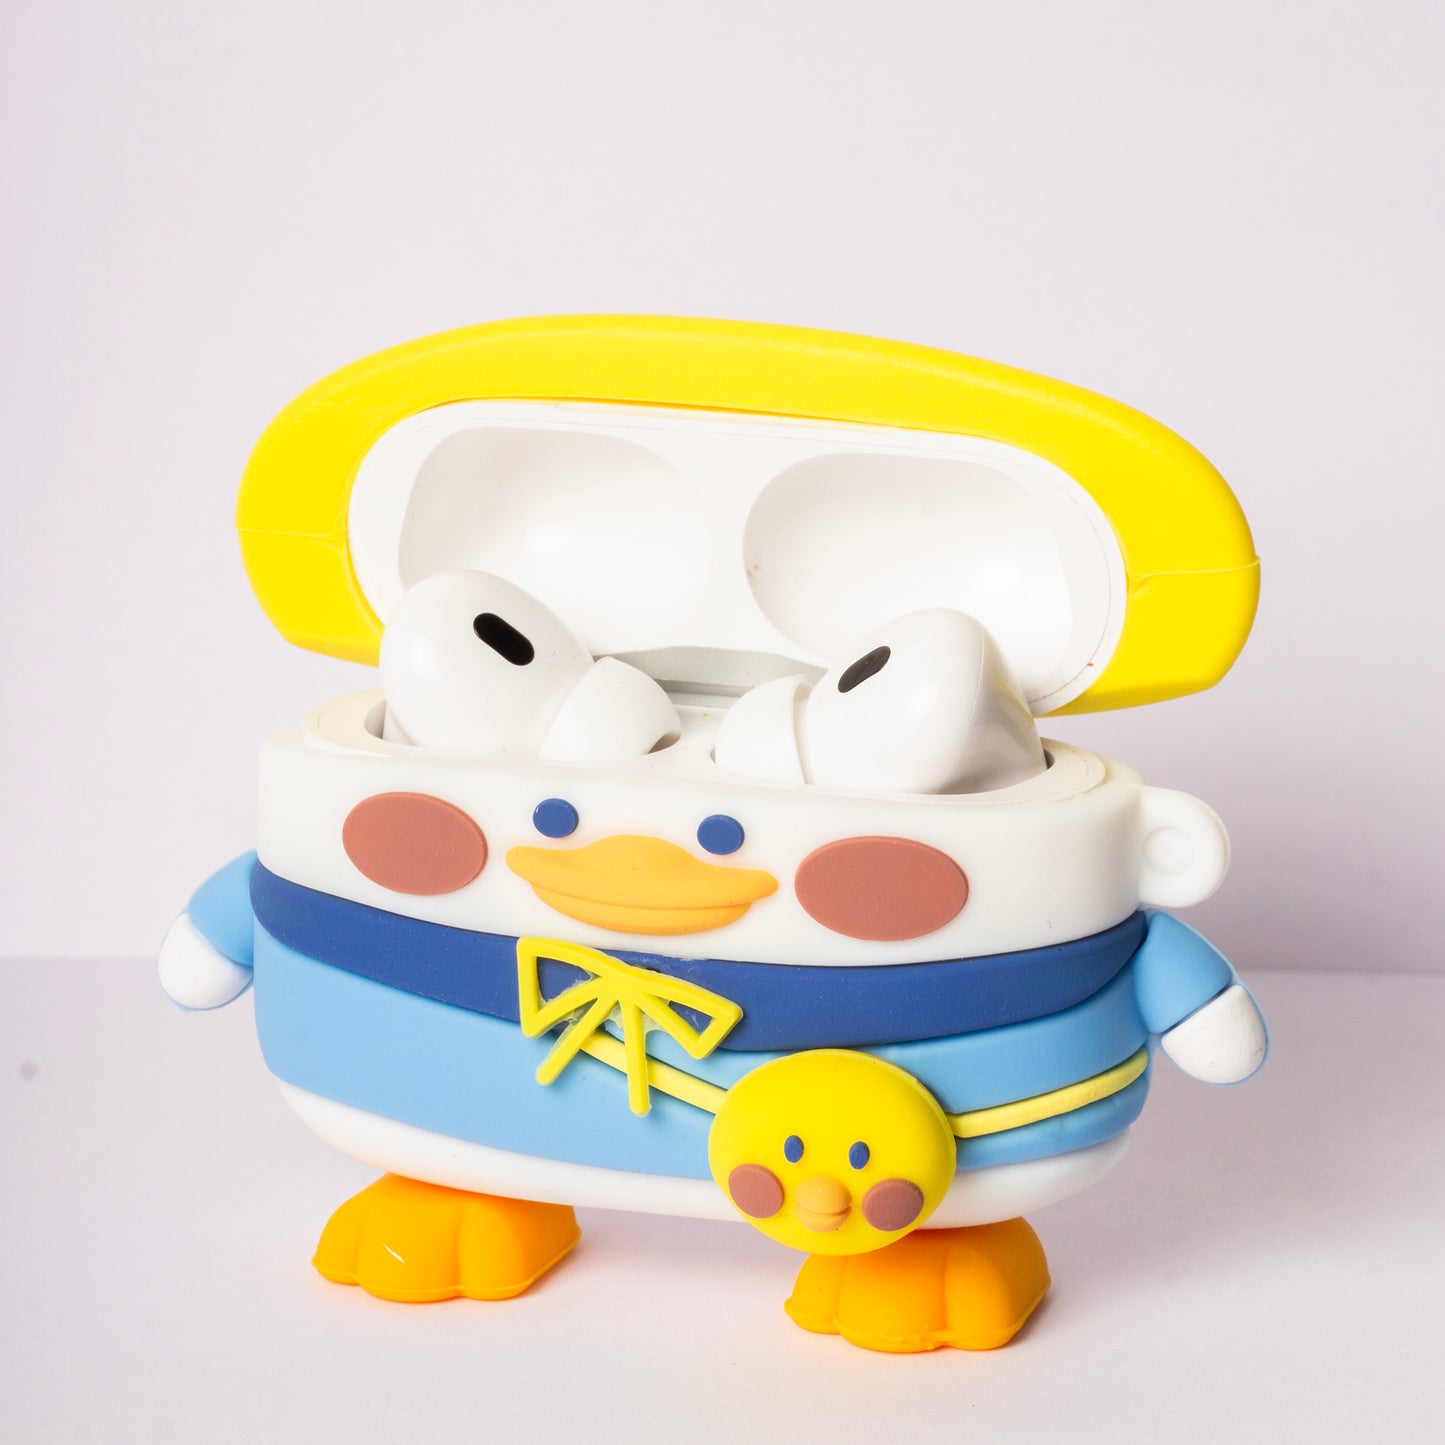 Cute Duckling Silicon Cover with 3 Caps